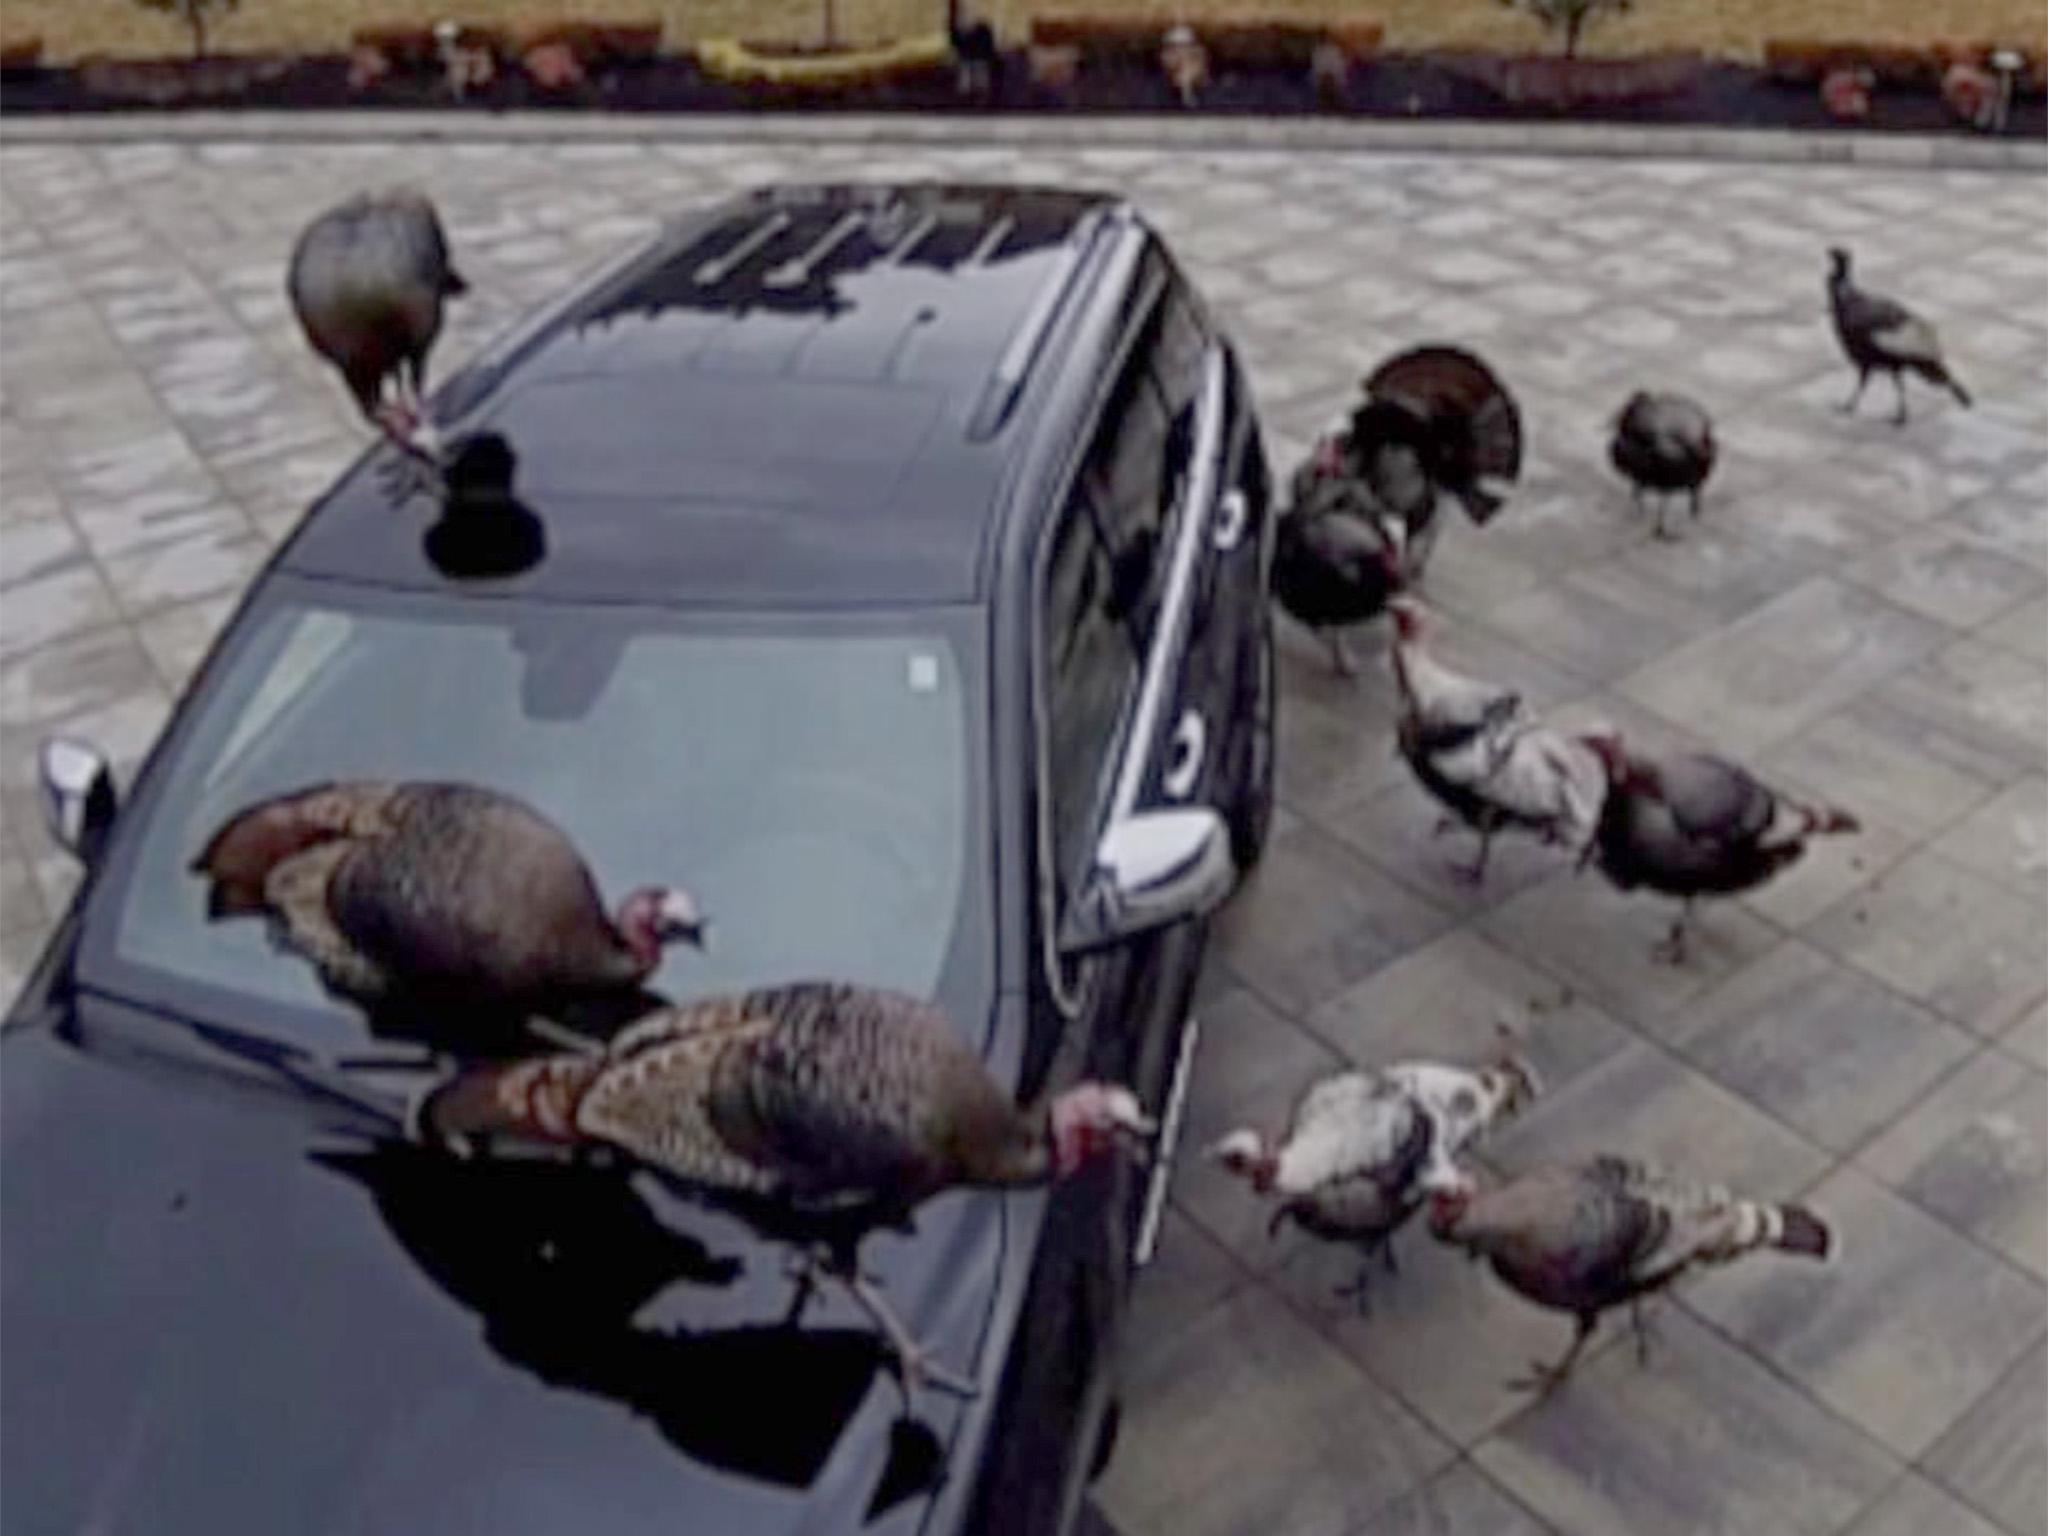 Some residents have complained about the behaviour of the turkeys